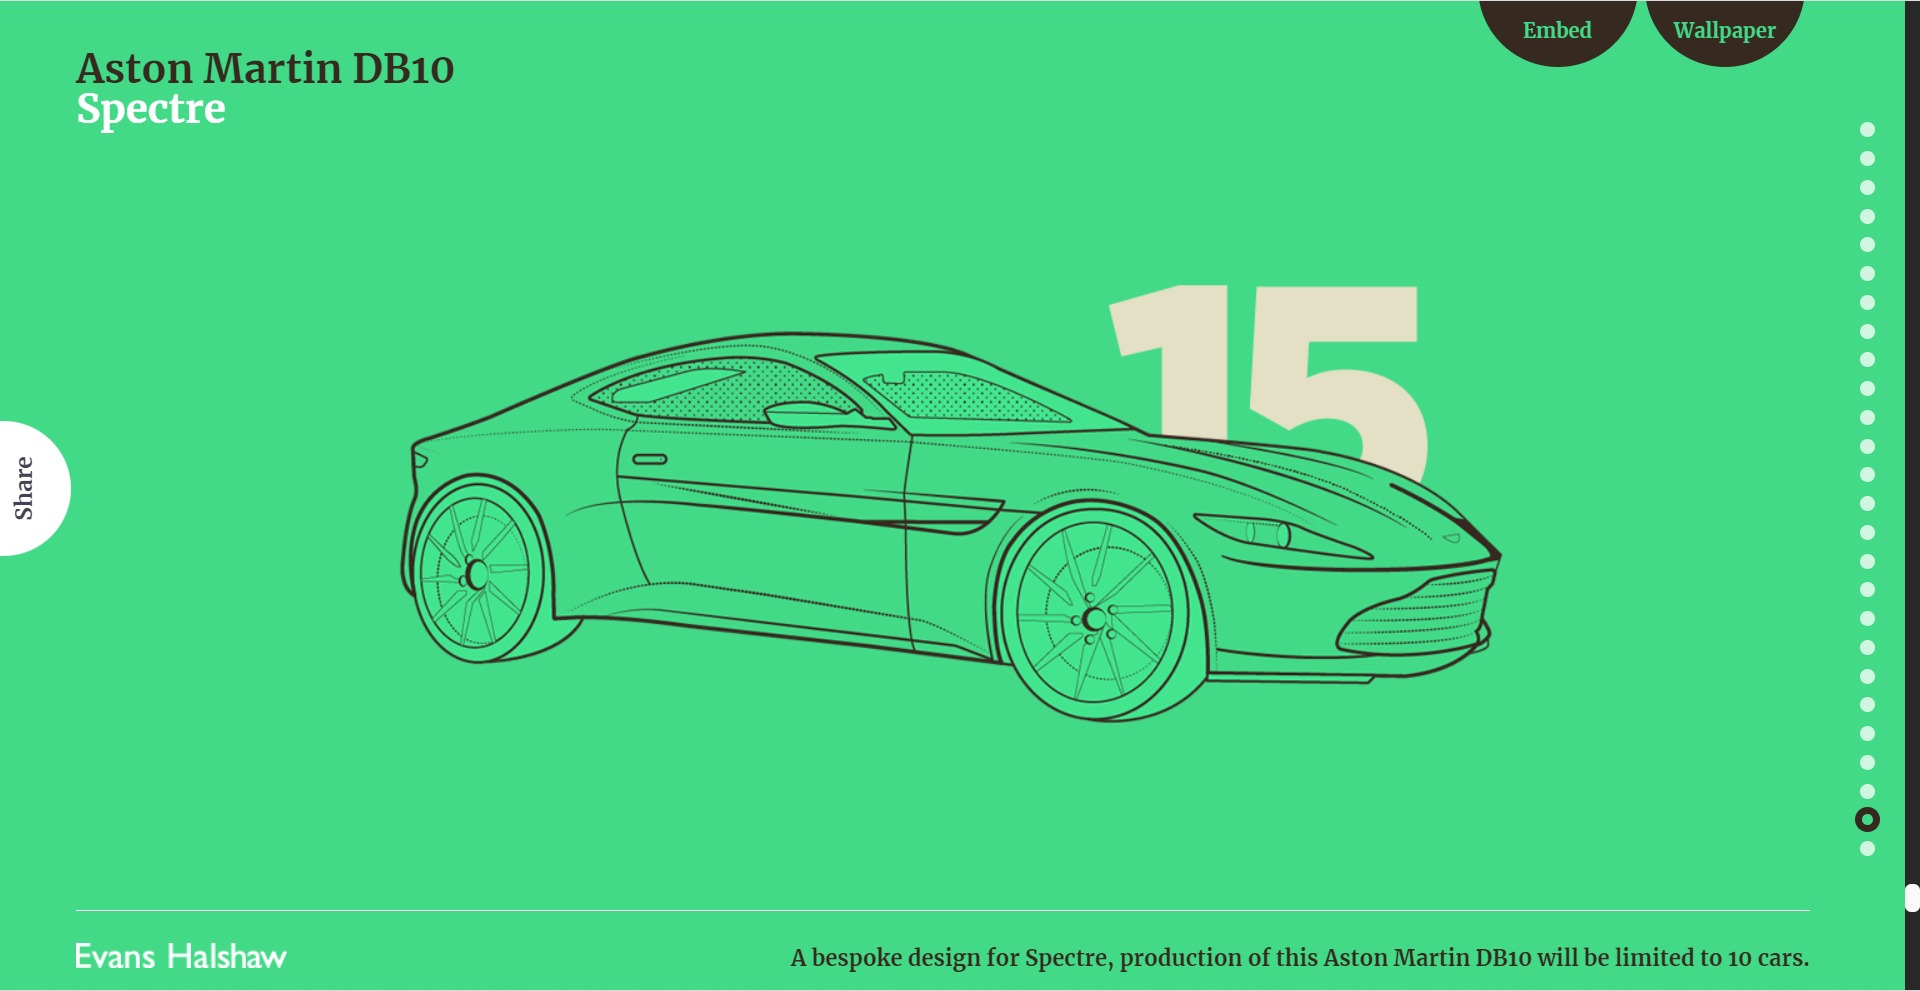 An interactive infographic designed by vehicle retailer Evans Halshaw